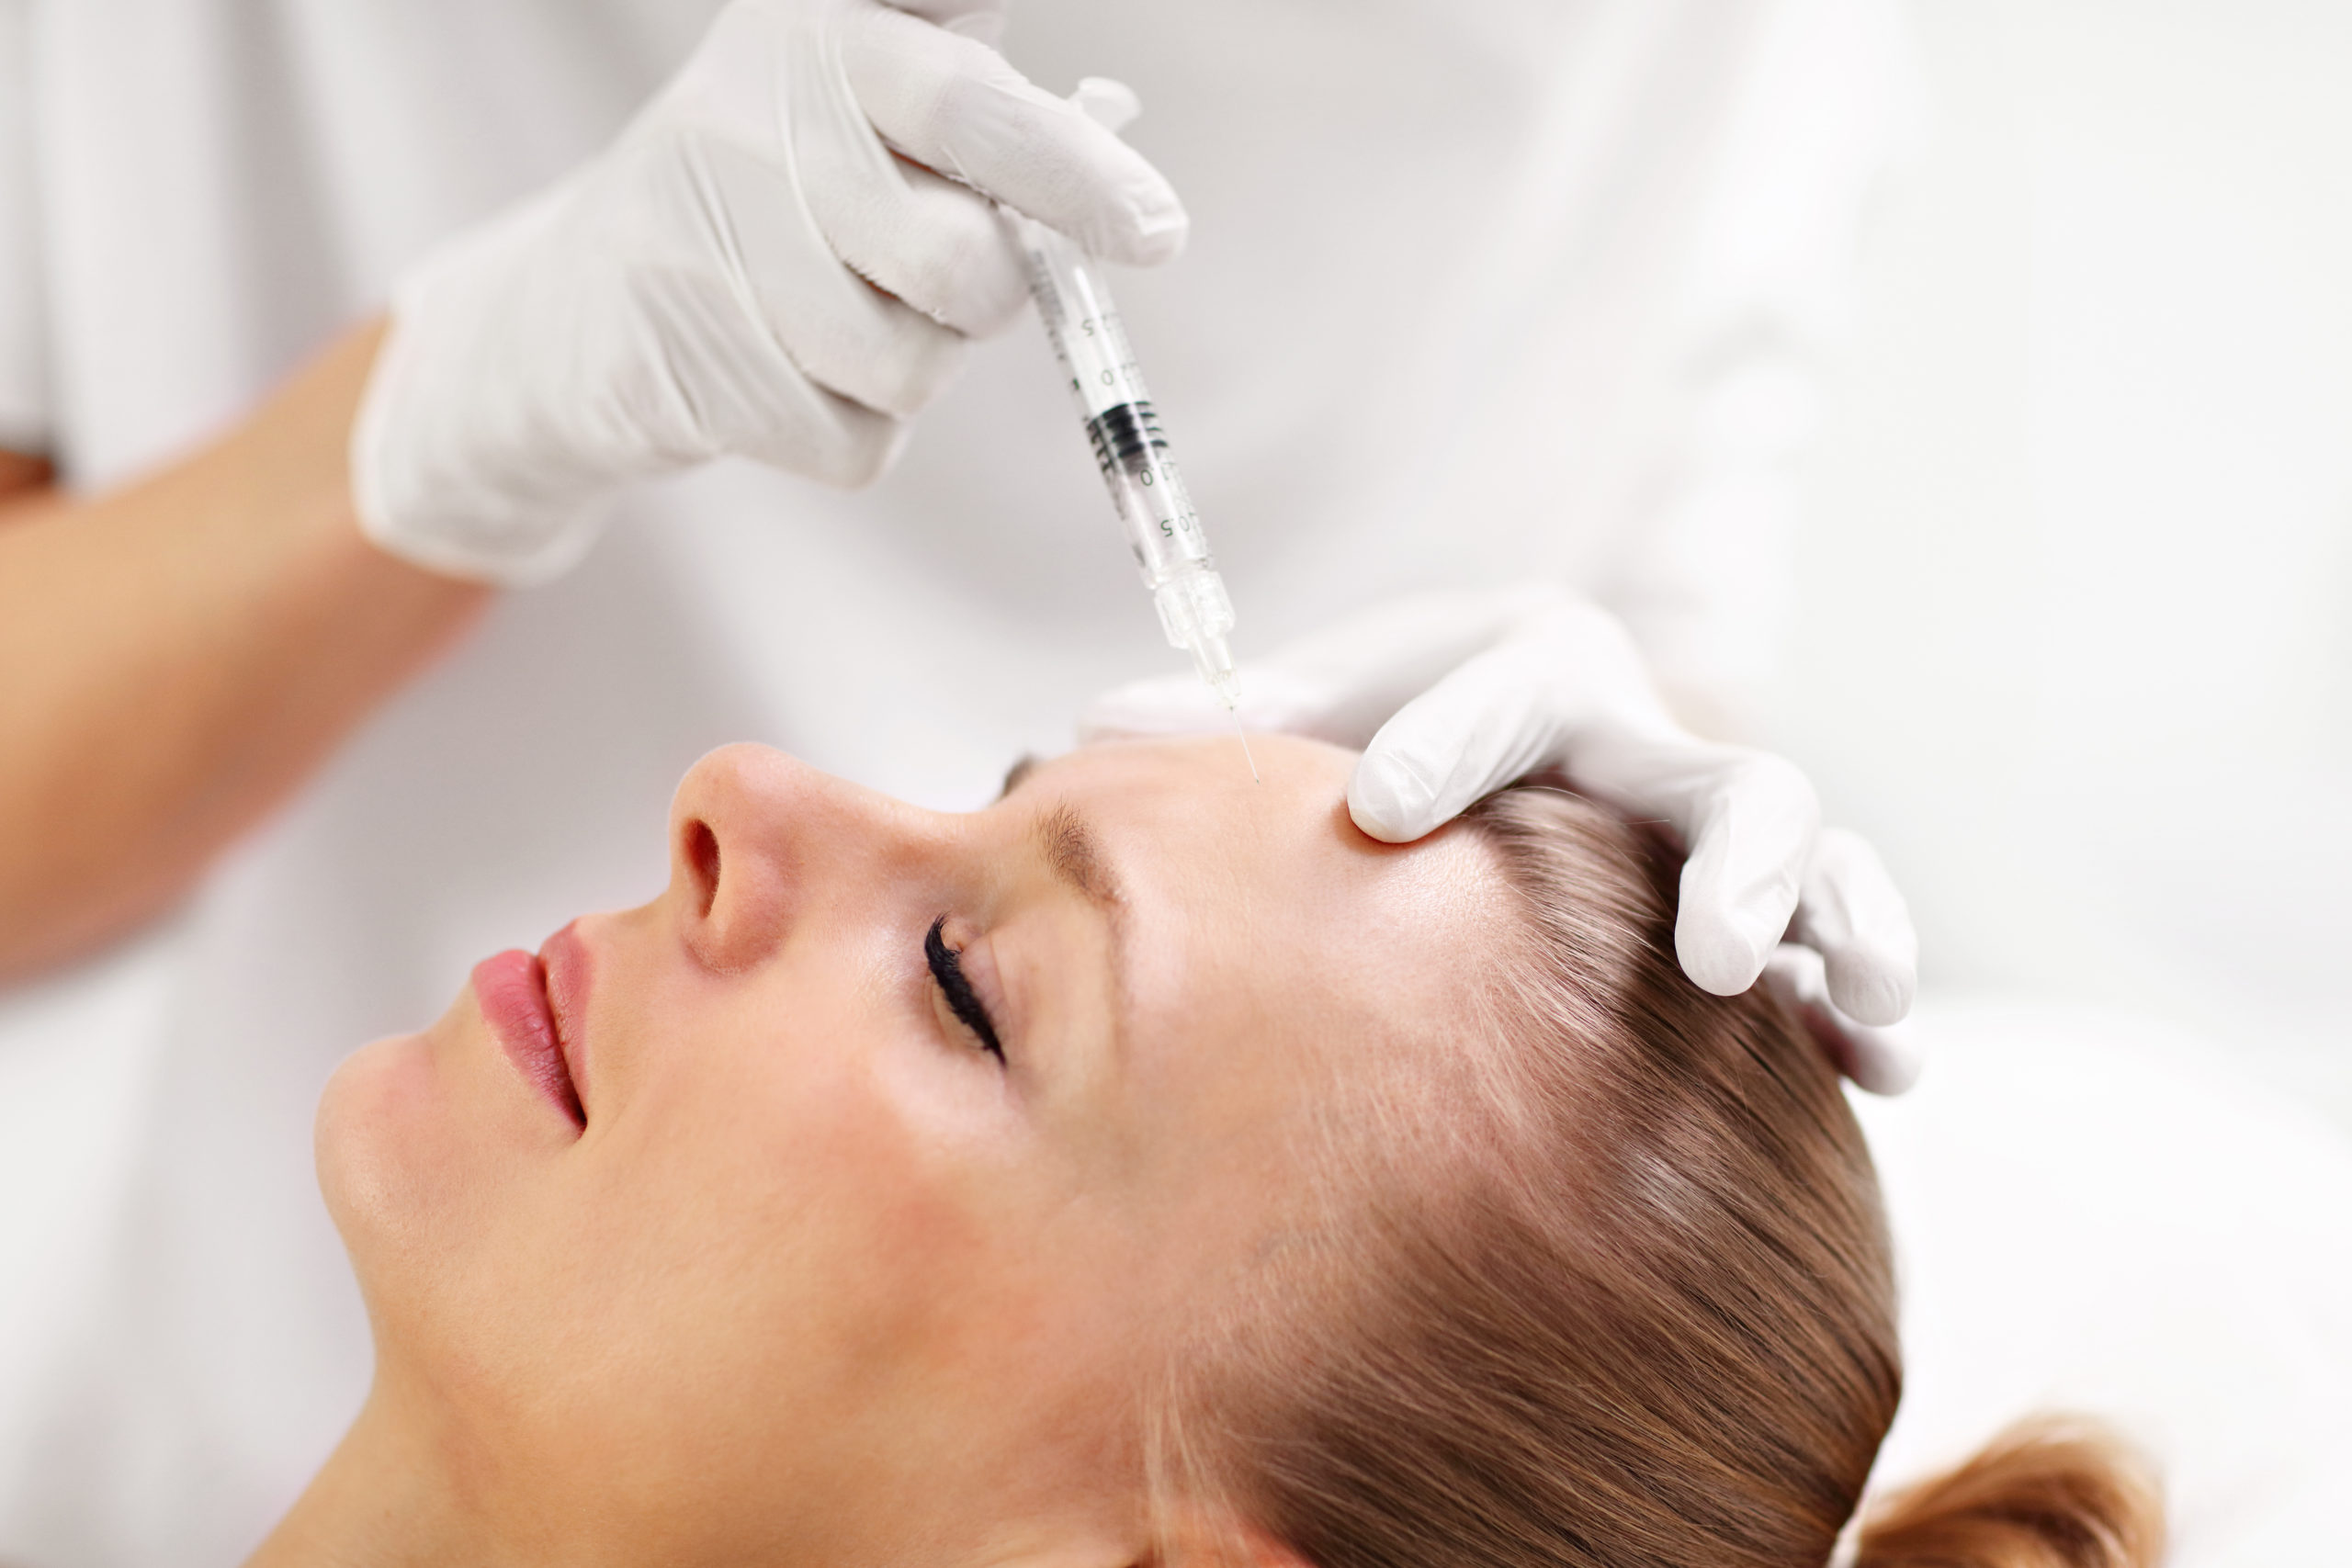 How to Decrease Complications after Botox